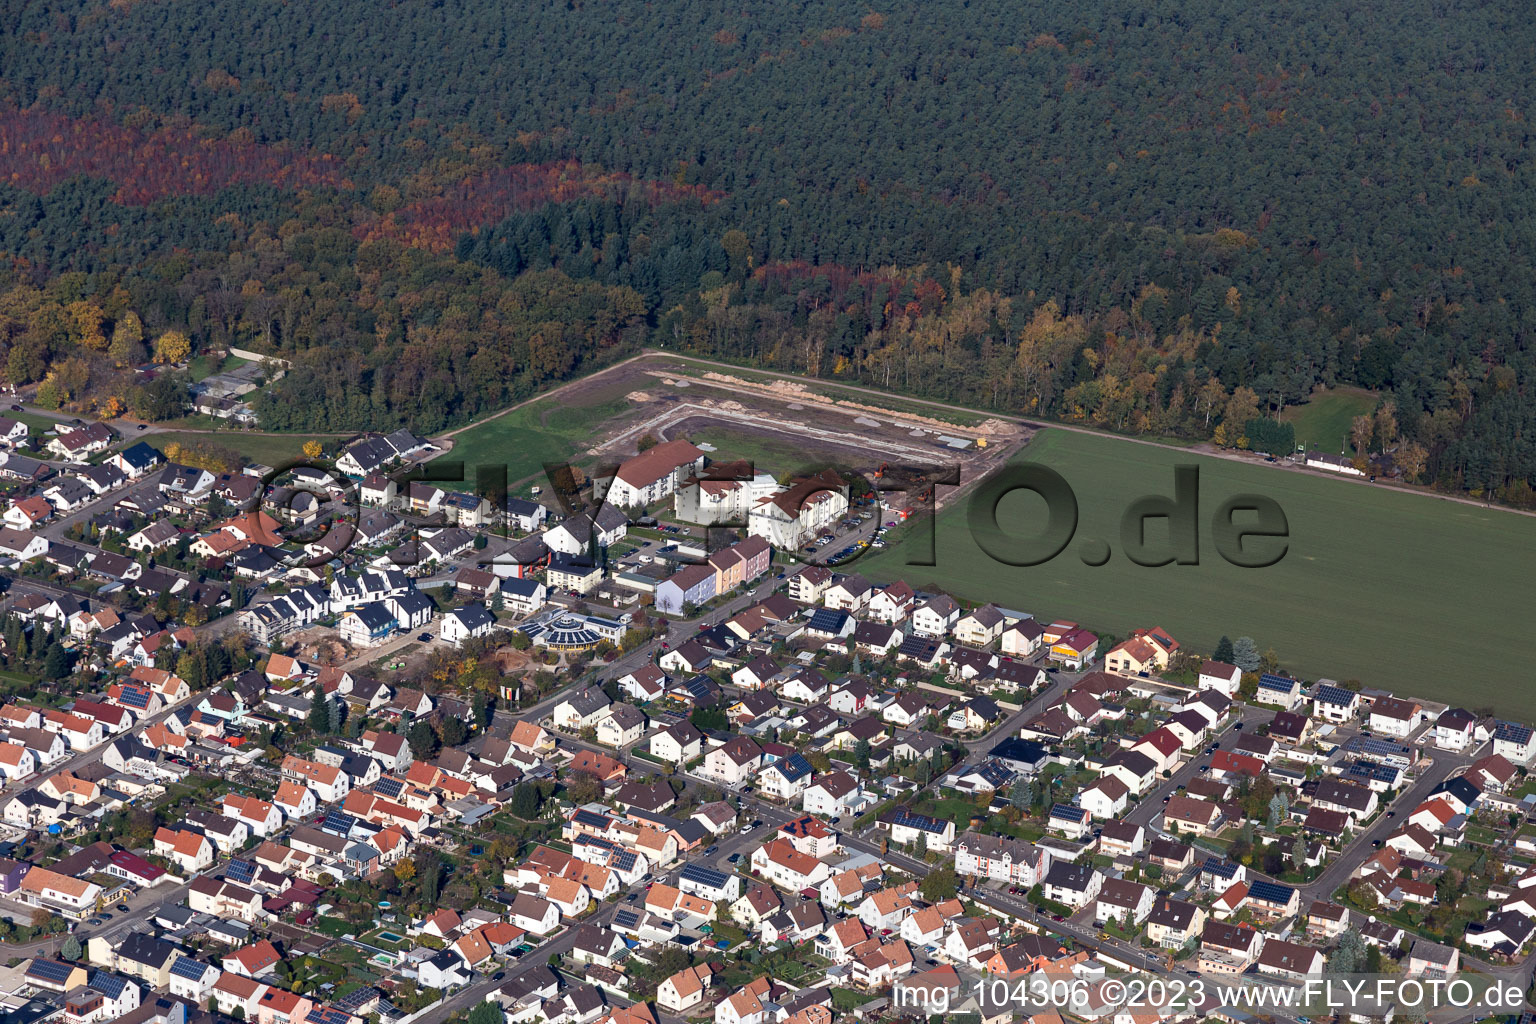 Drone recording of Bellheim in the state Rhineland-Palatinate, Germany